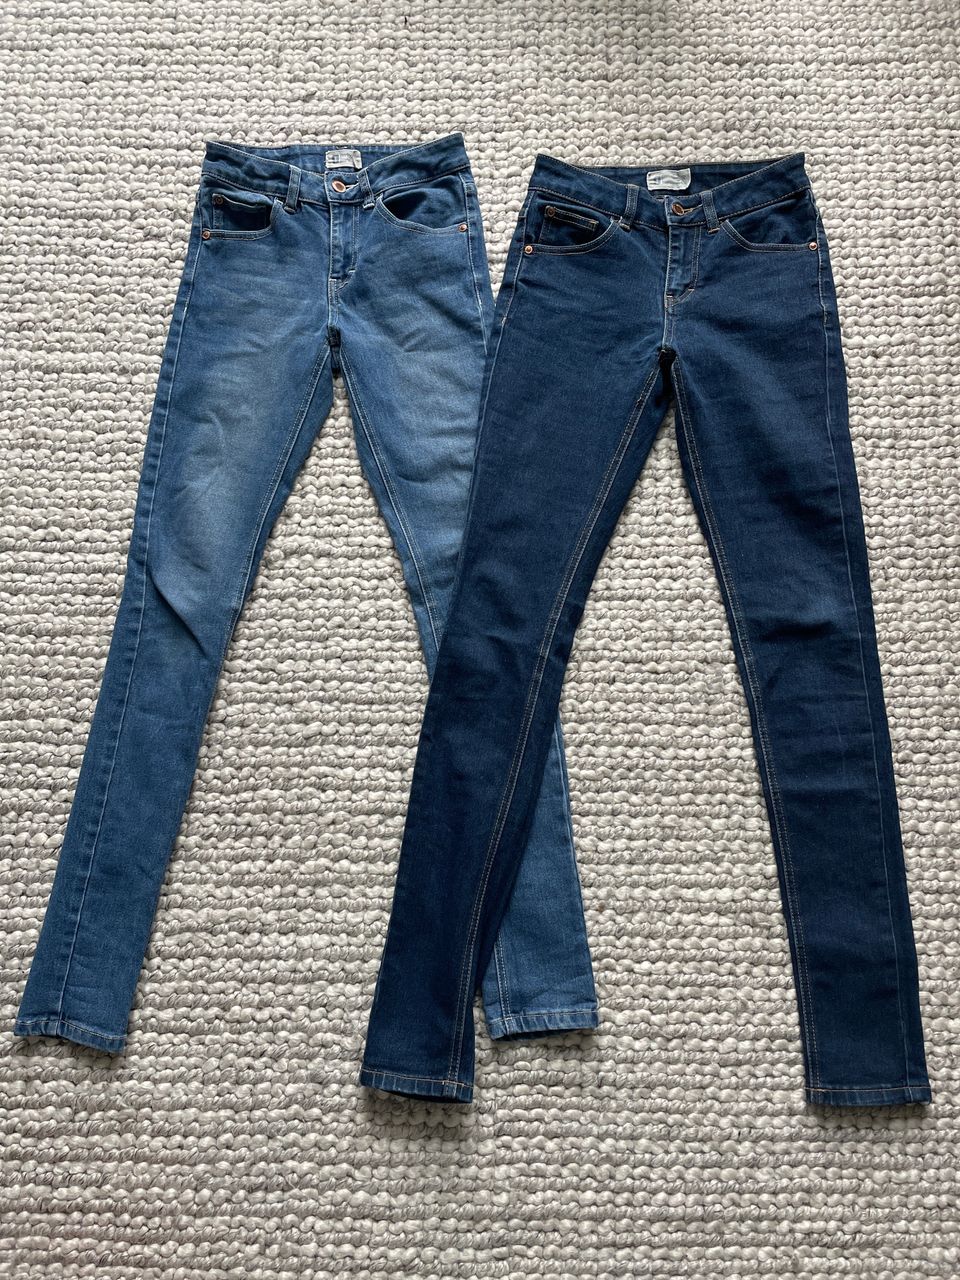 Gina Tricot Perfect Jeans 24 vaaleansiniset